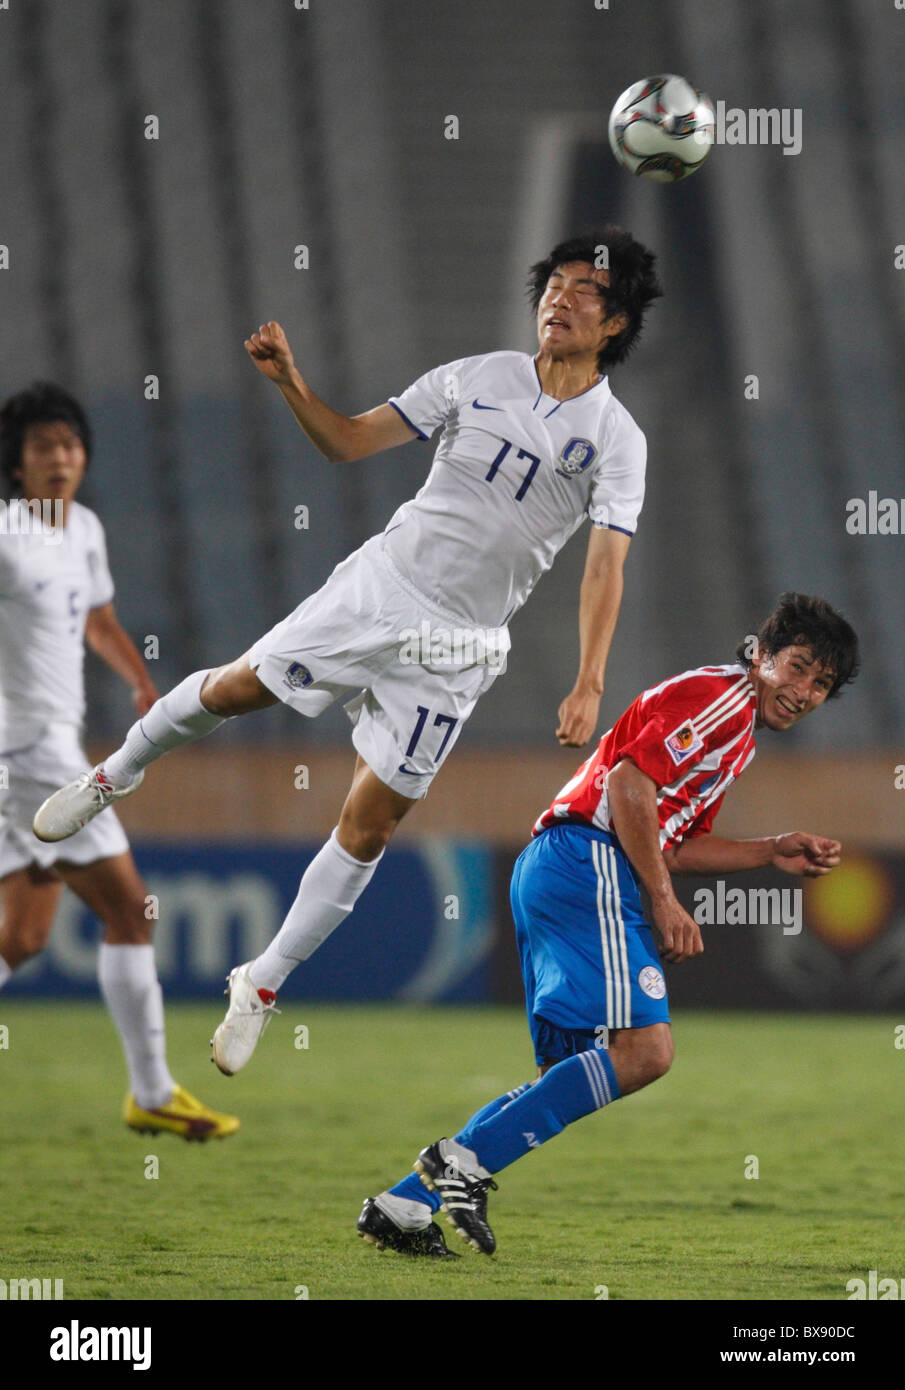 Suk Young Yun of South Korea (17) heads the ball over Hernan Perez of Paraguay during a 2009 U-20 World Cup round of 16 match. Stock Photo